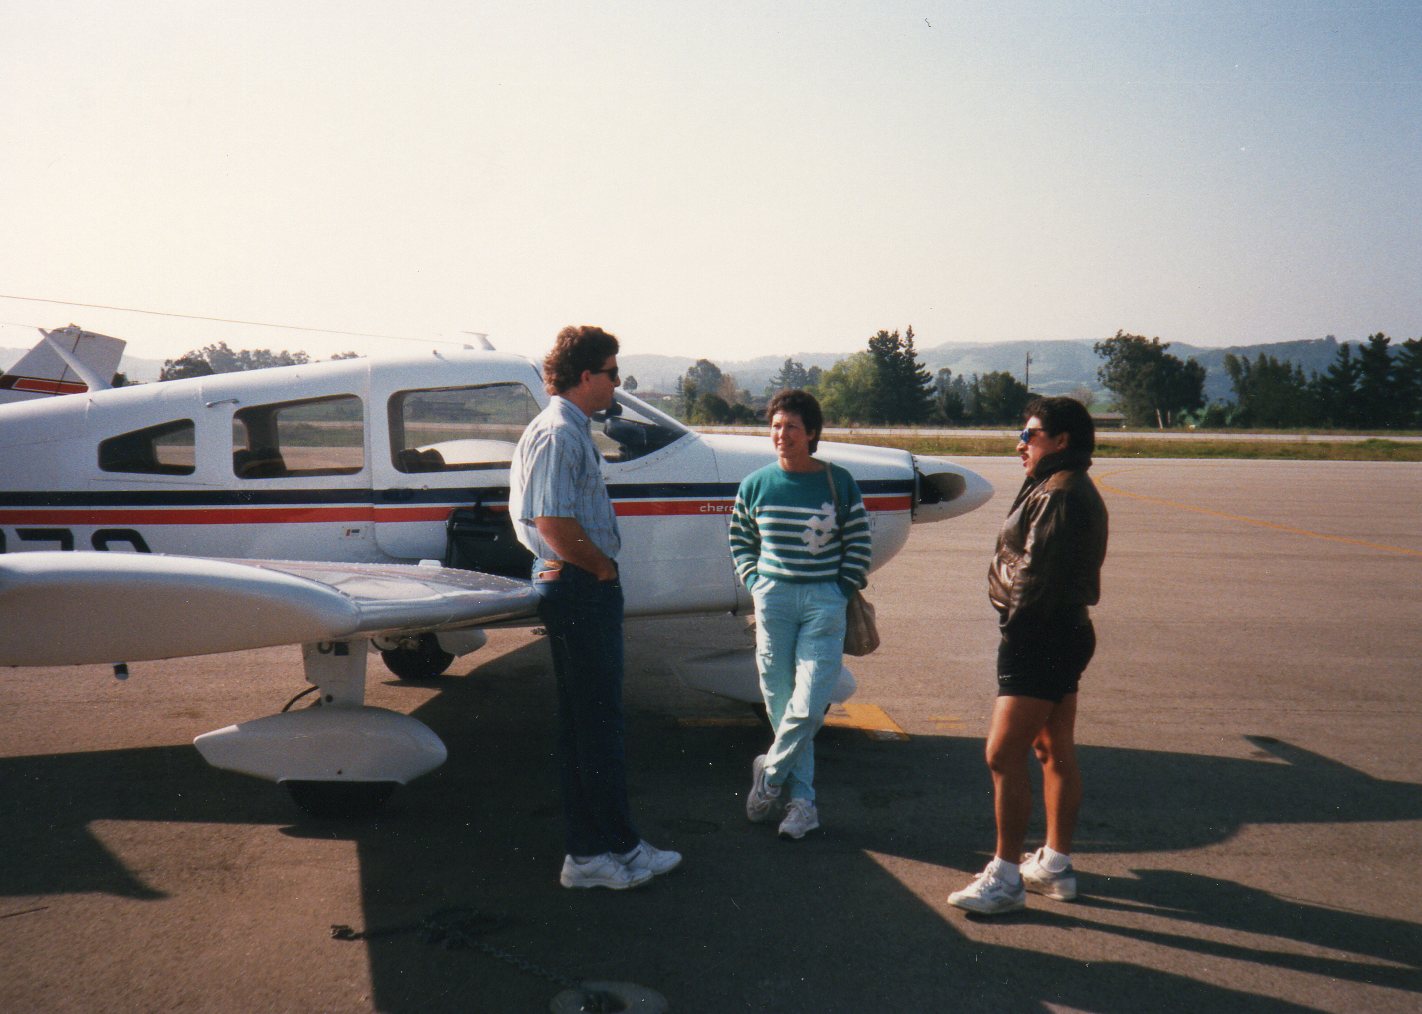 Breakfast Club Pre-flight
Brian Dawson, x-HP now with Jet Blue, Pat Persky, and John Mojica with the Hooter's shorts on. ~1987-88
